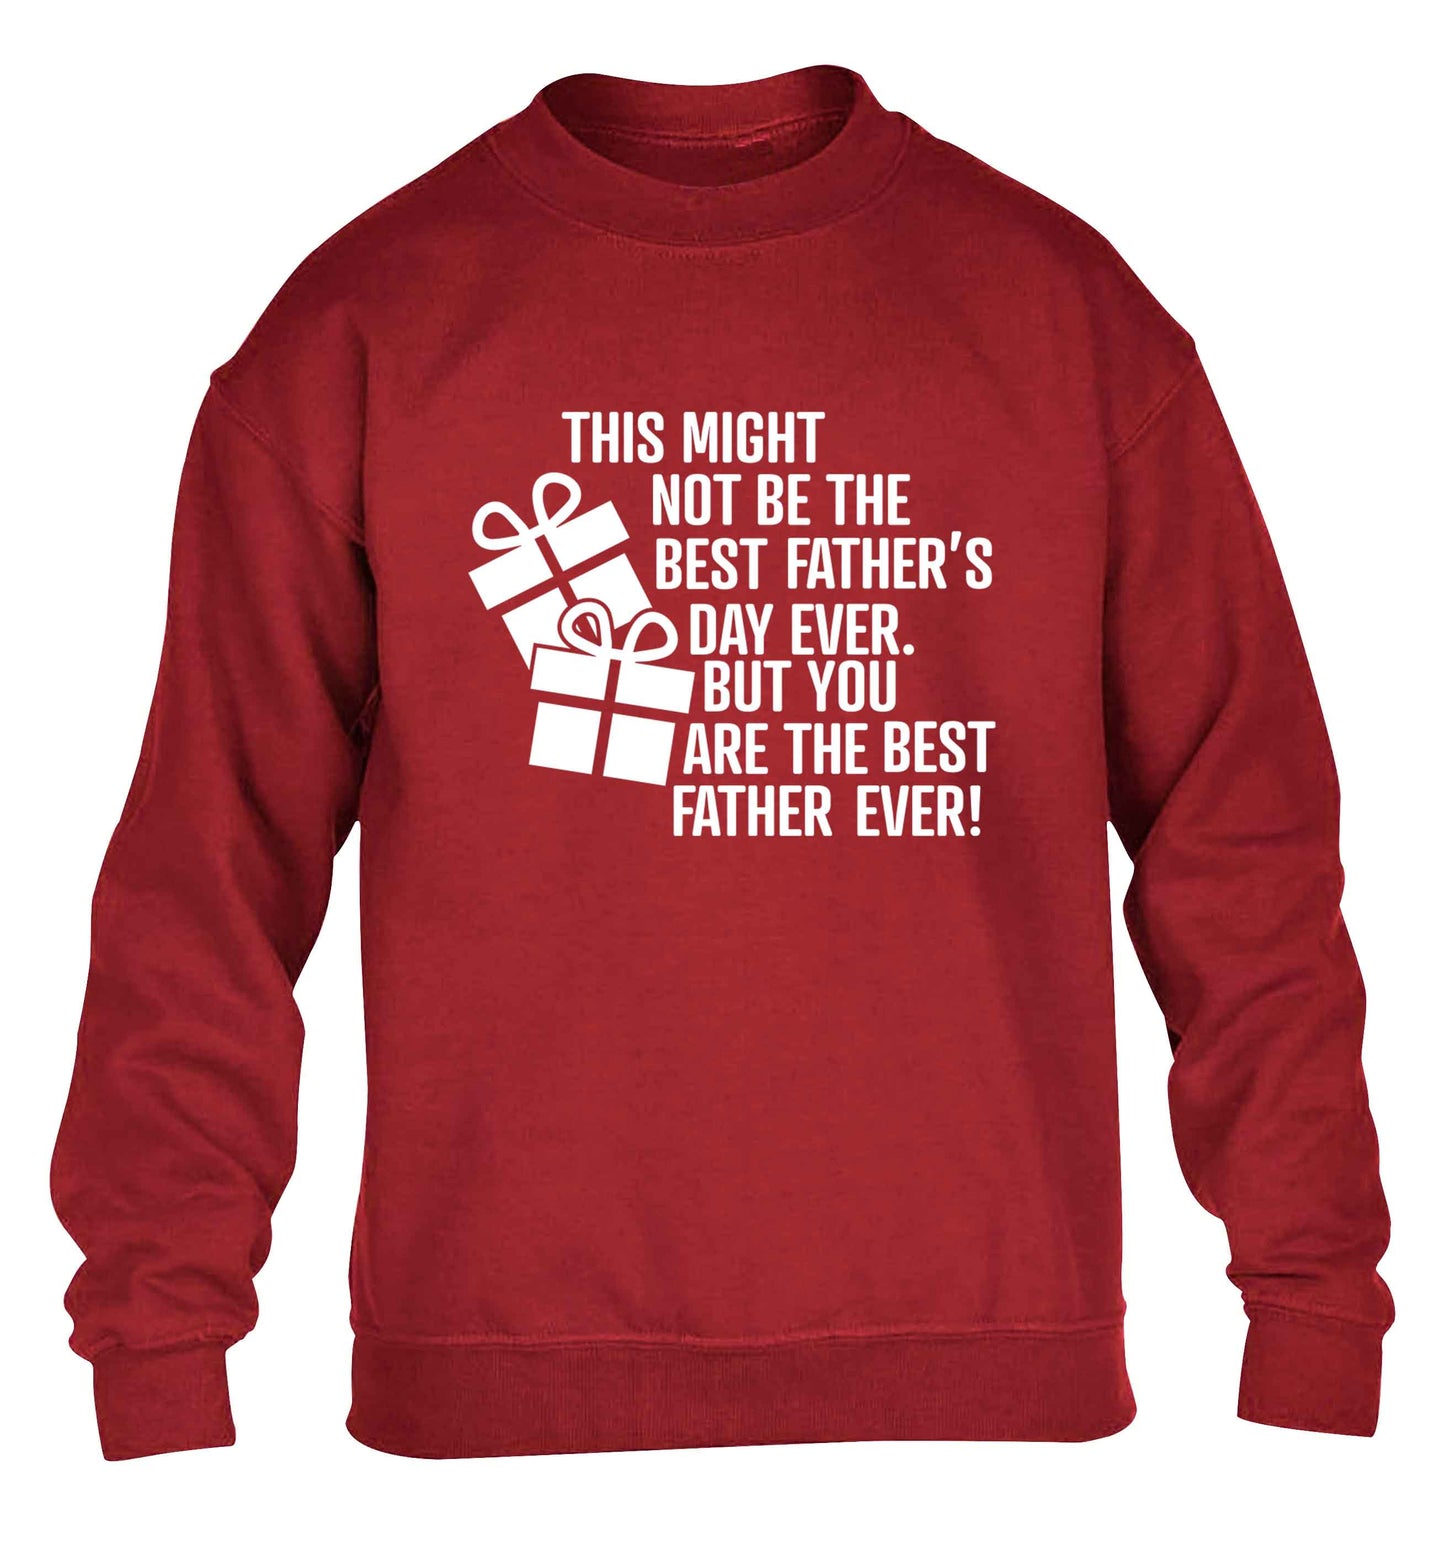 It might not be the best Father's Day ever but you are the best father ever! children's grey sweater 12-13 Years